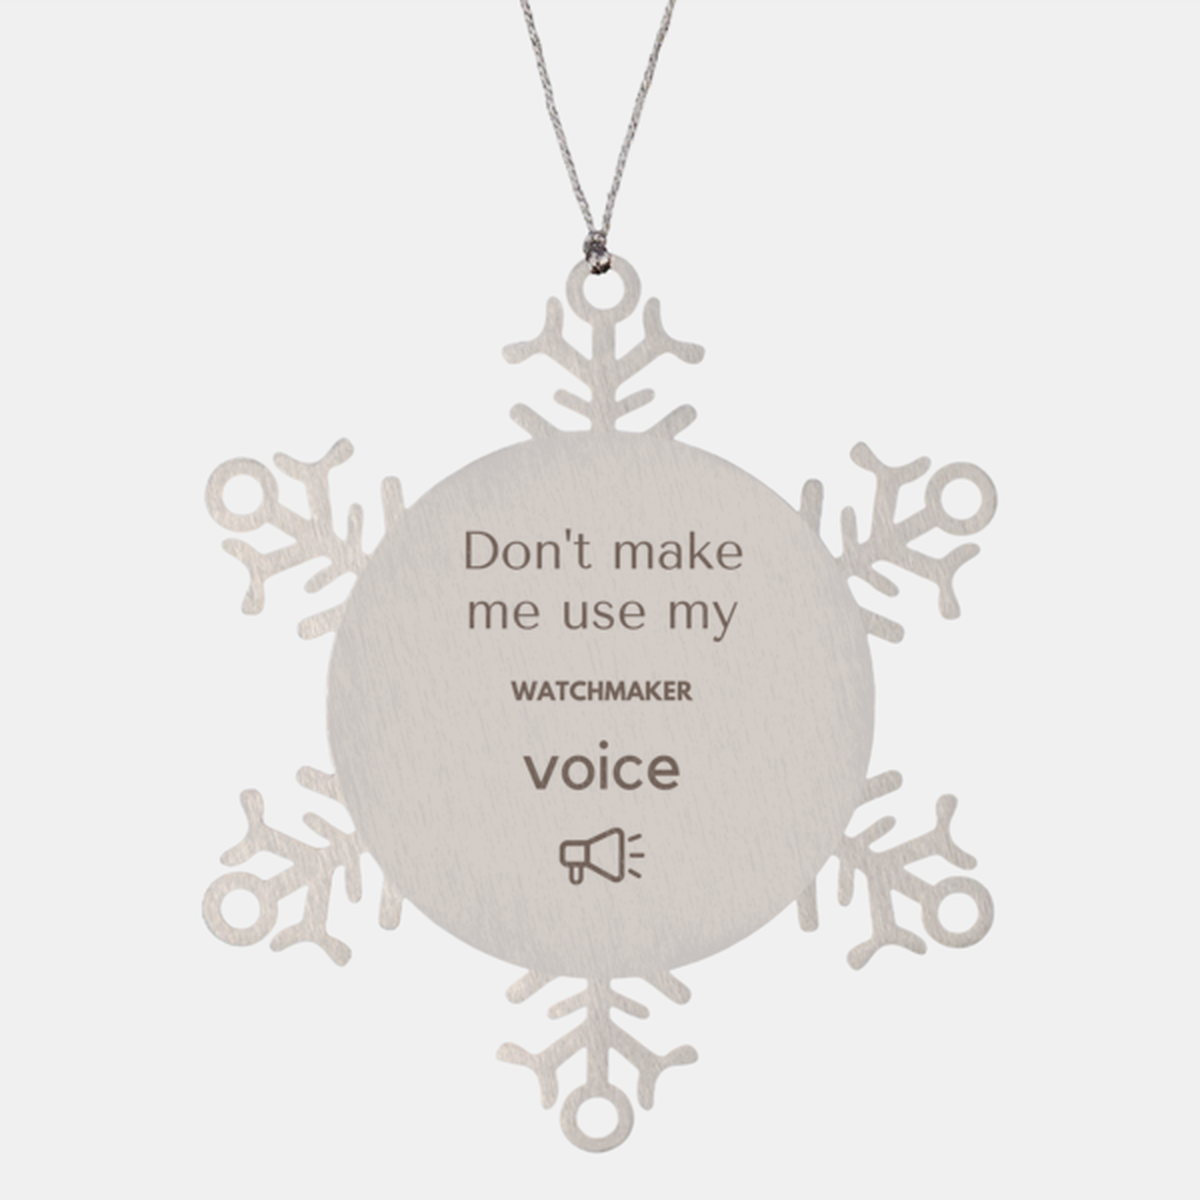 Don't make me use my Watchmaker voice, Sarcasm Watchmaker Ornament Gifts, Christmas Watchmaker Snowflake Ornament Unique Gifts For Watchmaker Coworkers, Men, Women, Colleague, Friends